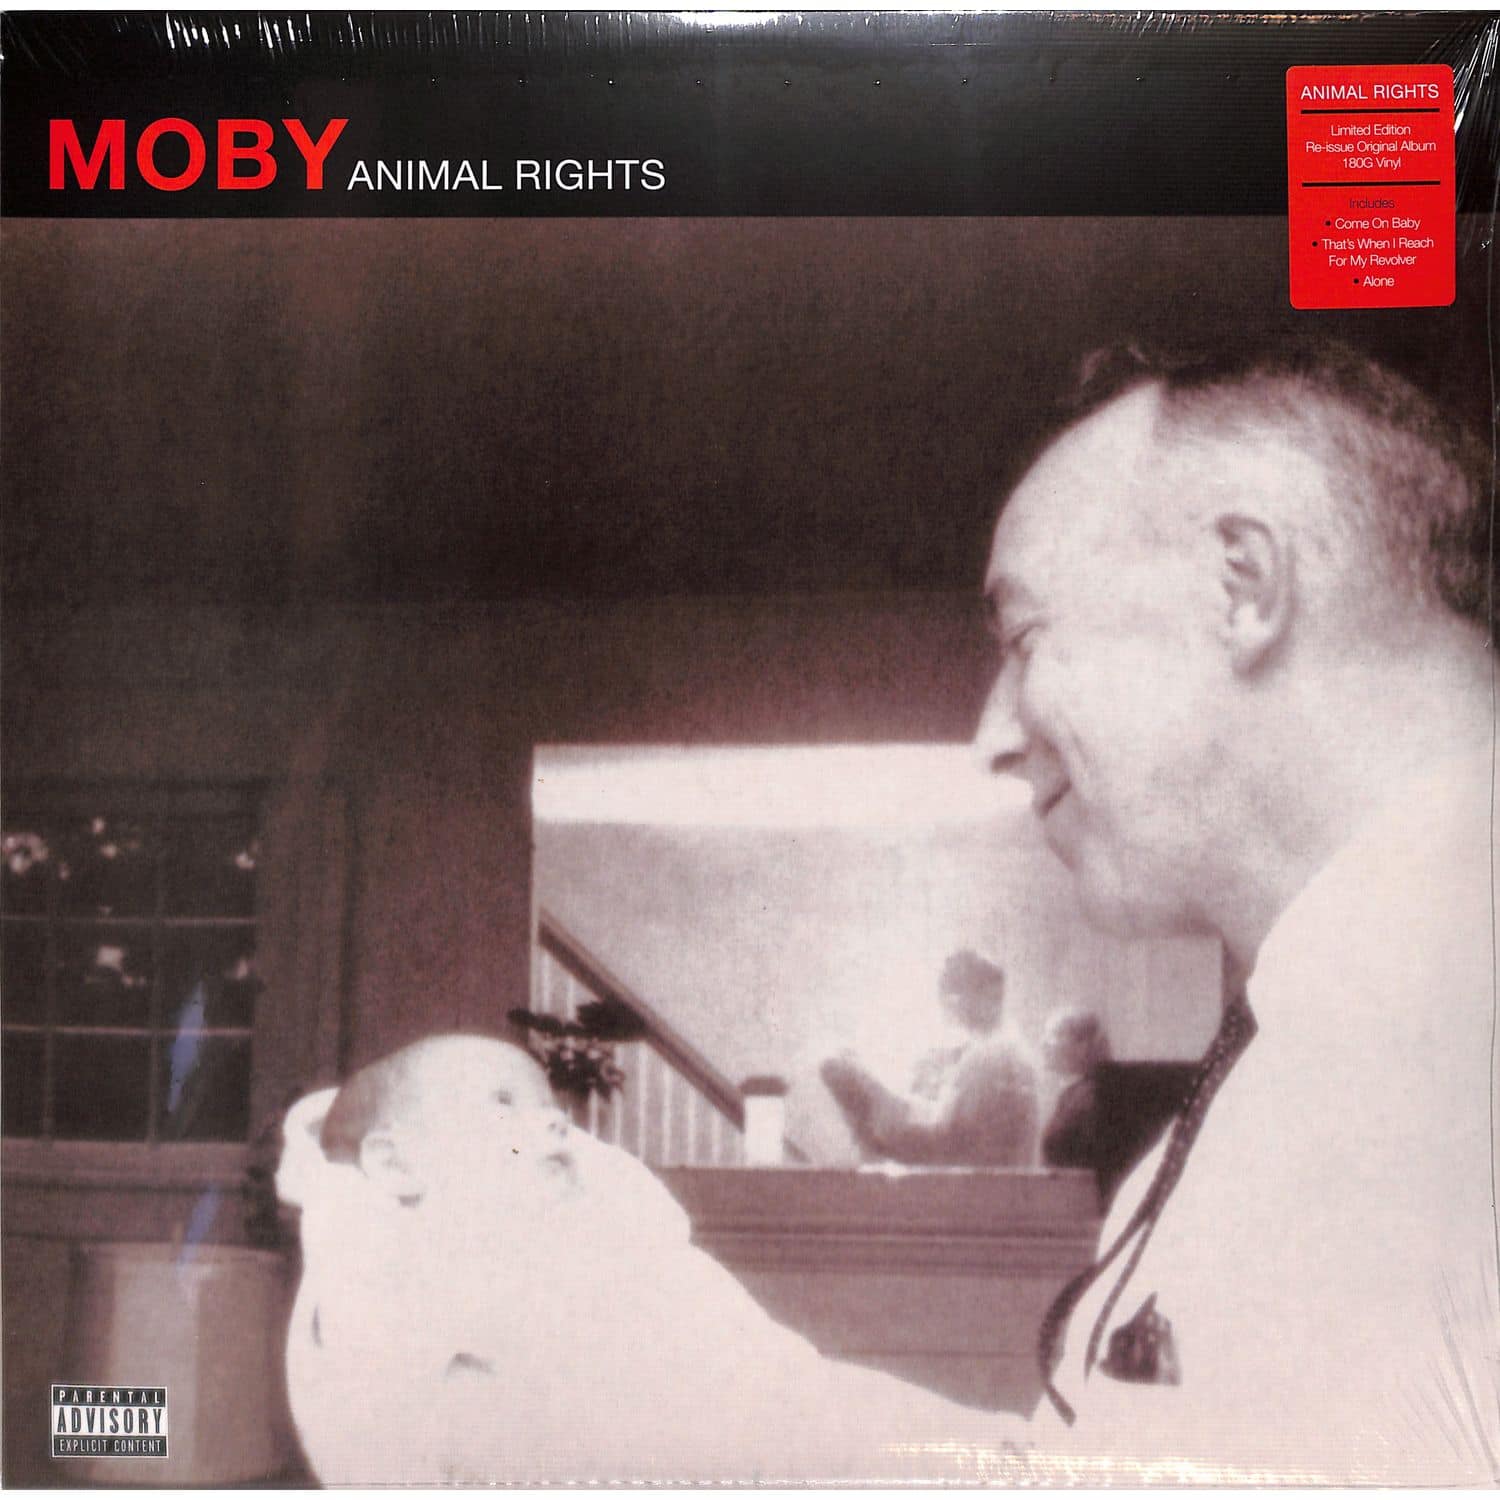 Moby - ANIMAL RIGHTS 